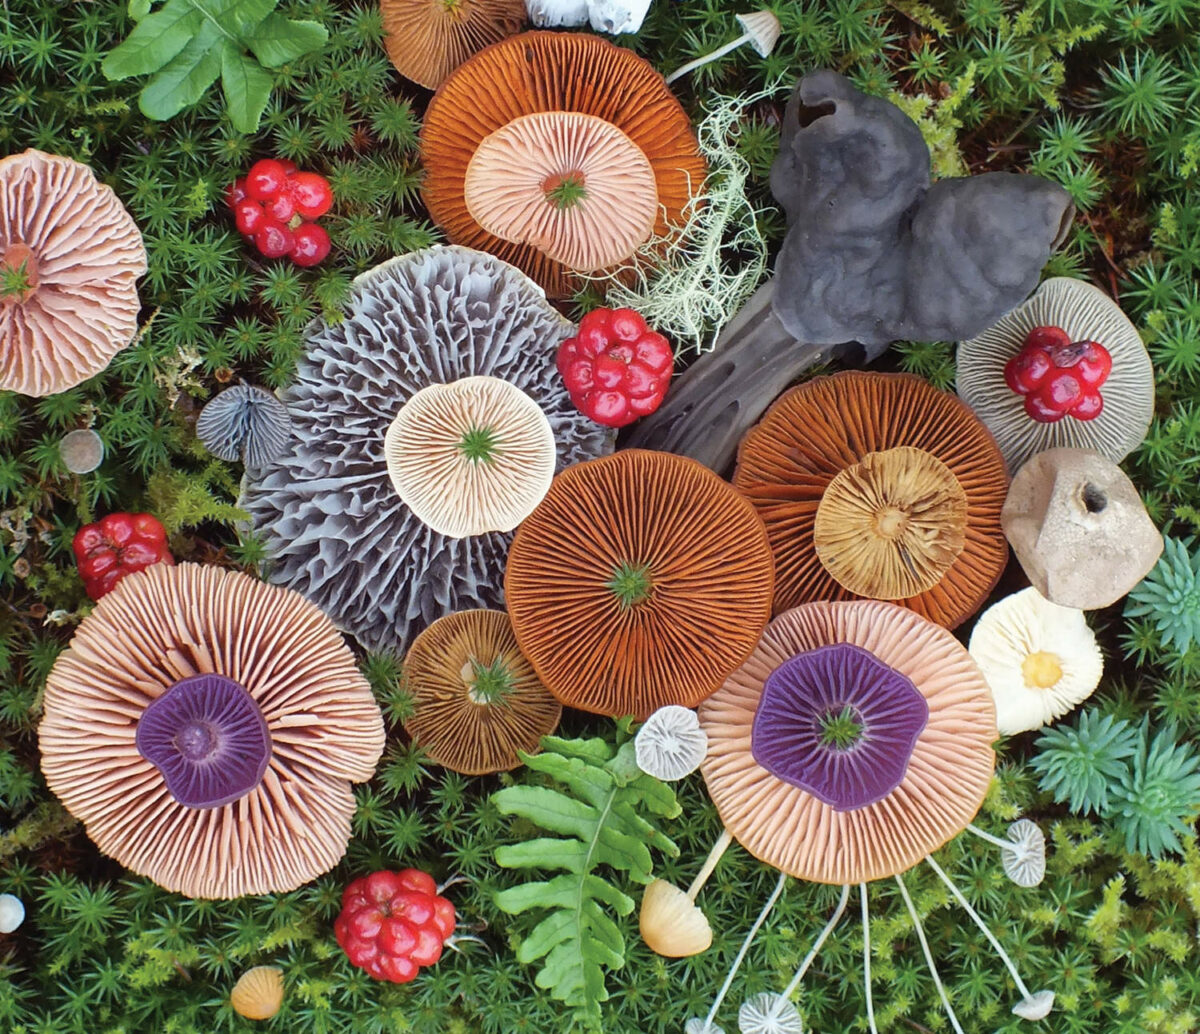 Colorful Arrangements Made Of Mushrooms By Jill Bliss 12